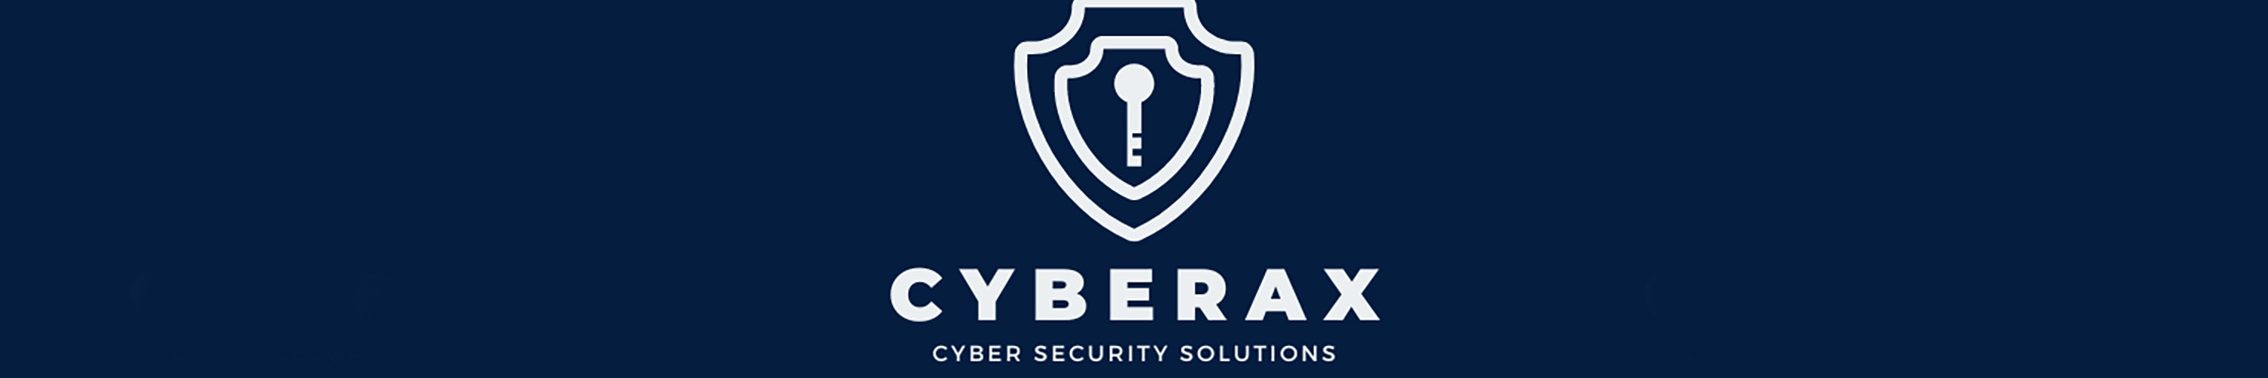 Cyberax – IT Solutions and Support